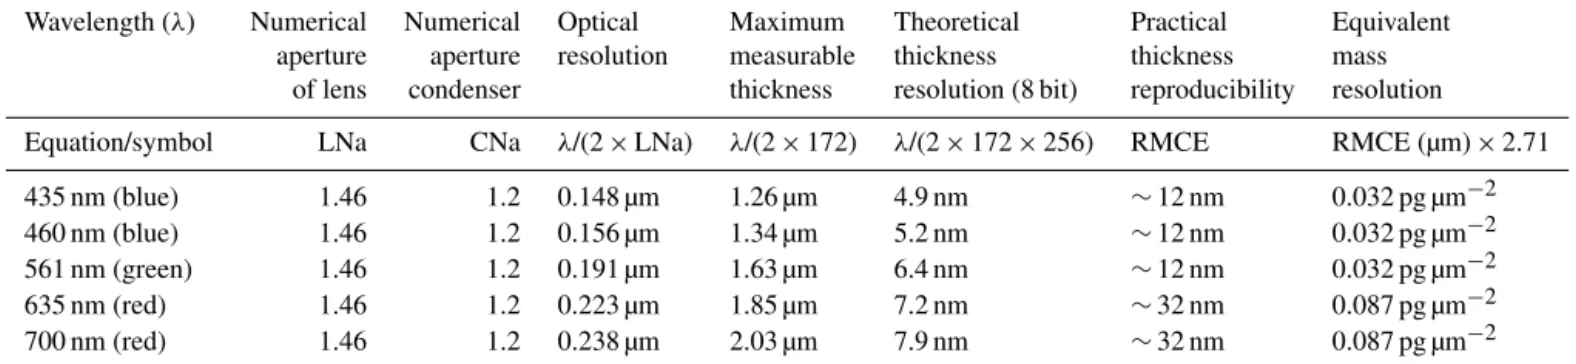 Table 1. Microscope parameters and inferred precision of the optics and measurements.